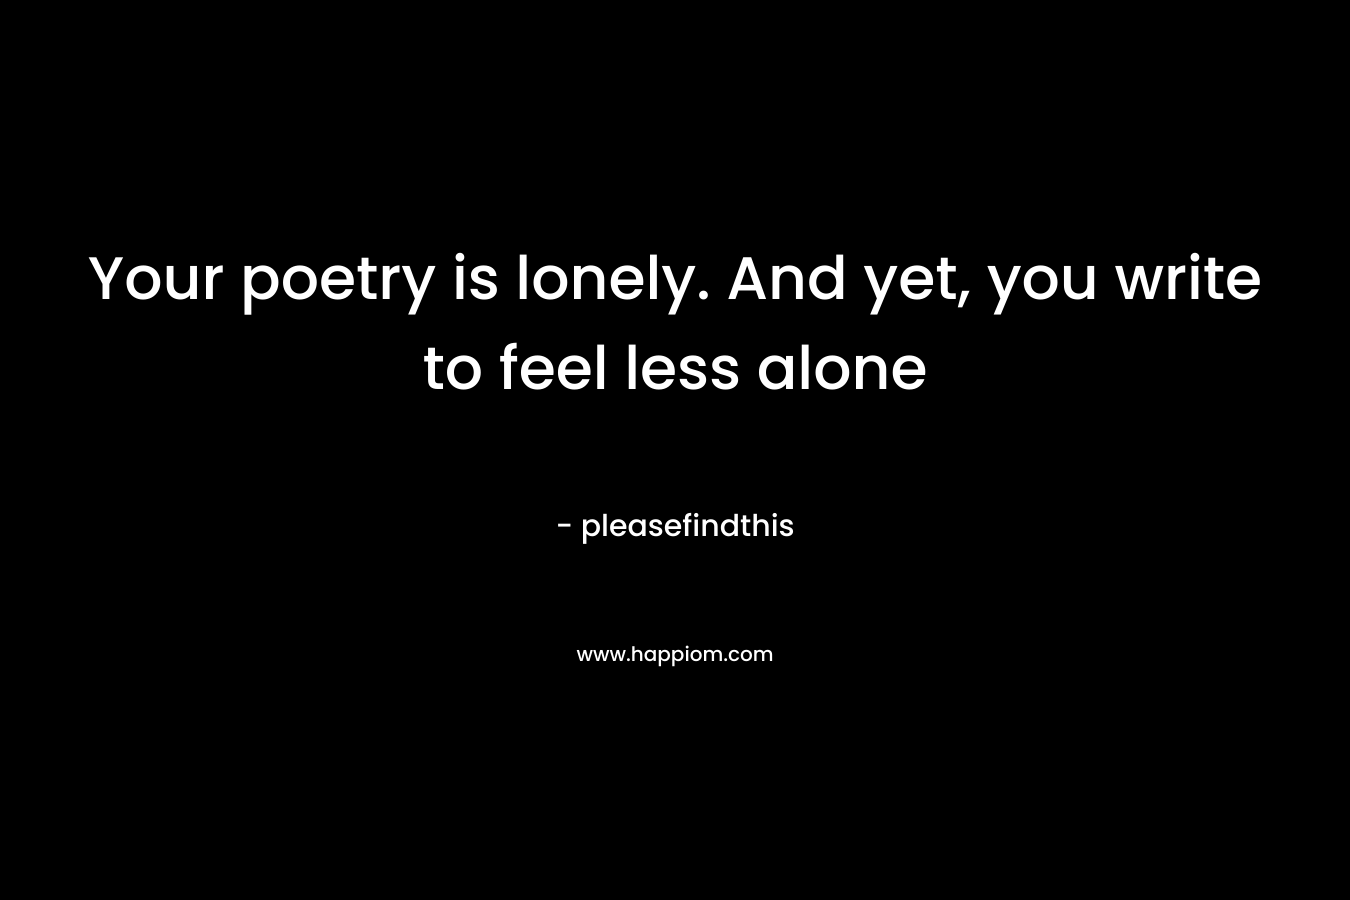 Your poetry is lonely. And yet, you write to feel less alone – pleasefindthis